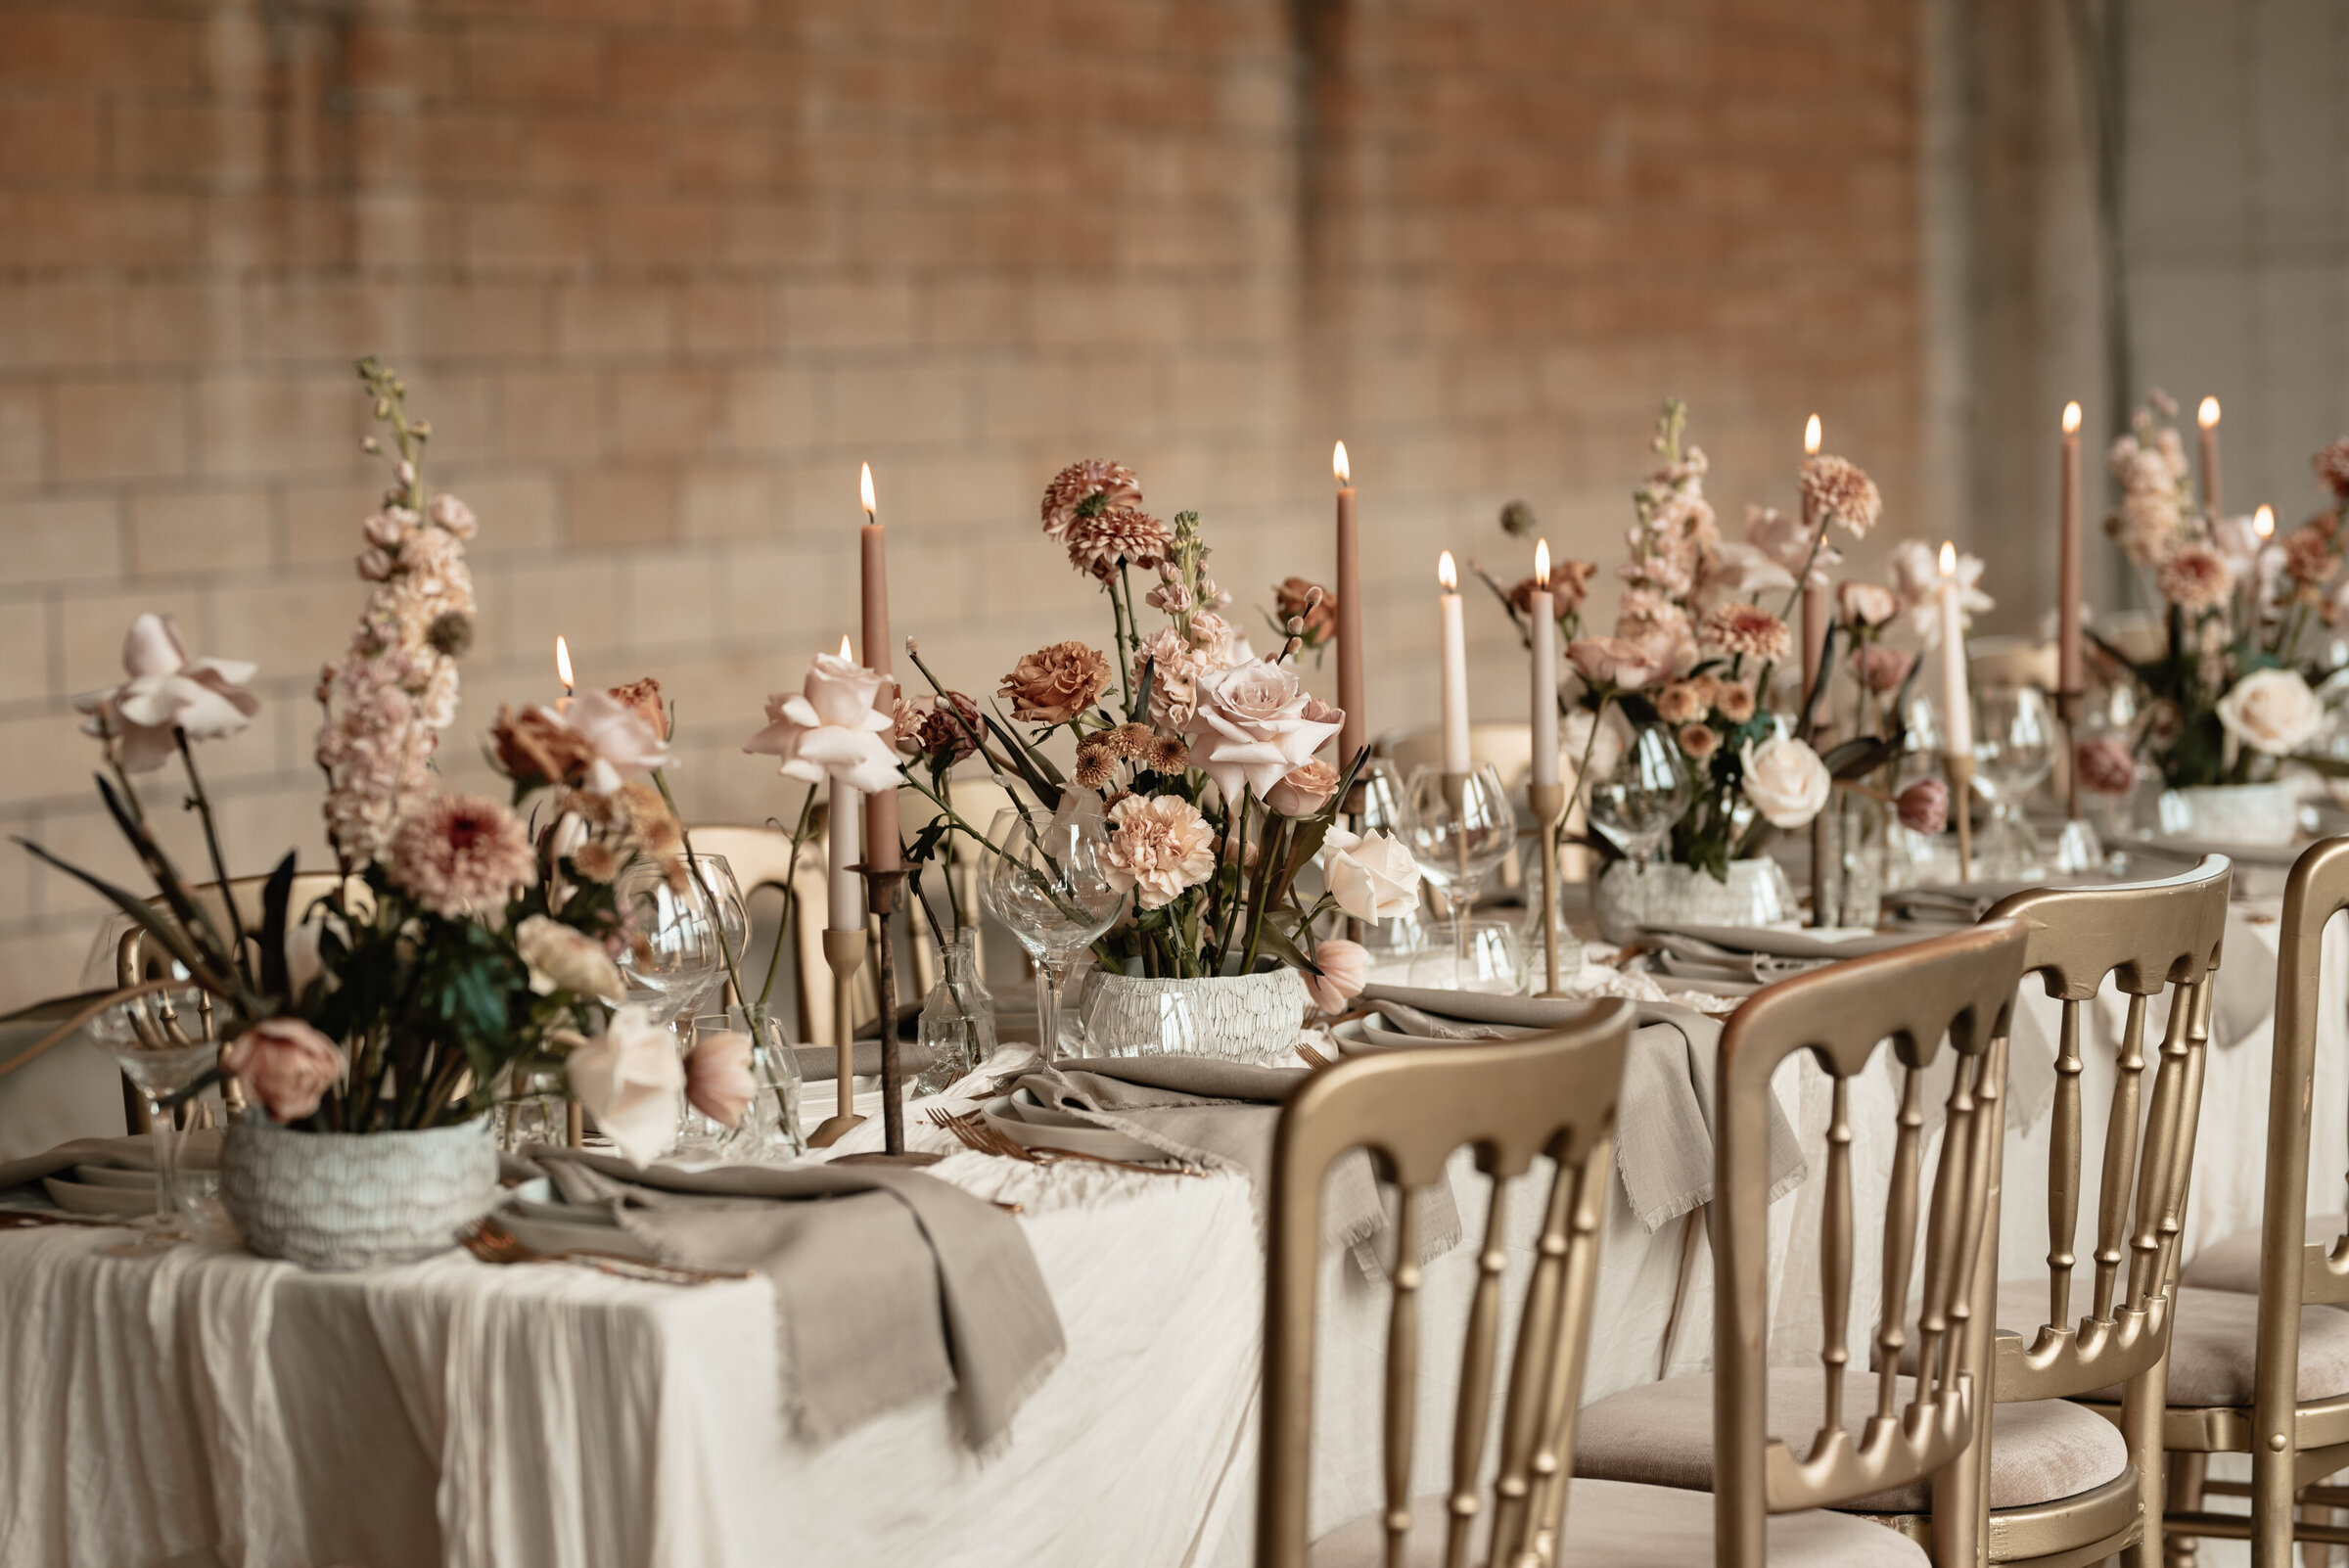 Wedding breakfast table with floral and candle stick arrangements at Grittleton House wedding venue in Wiltshire